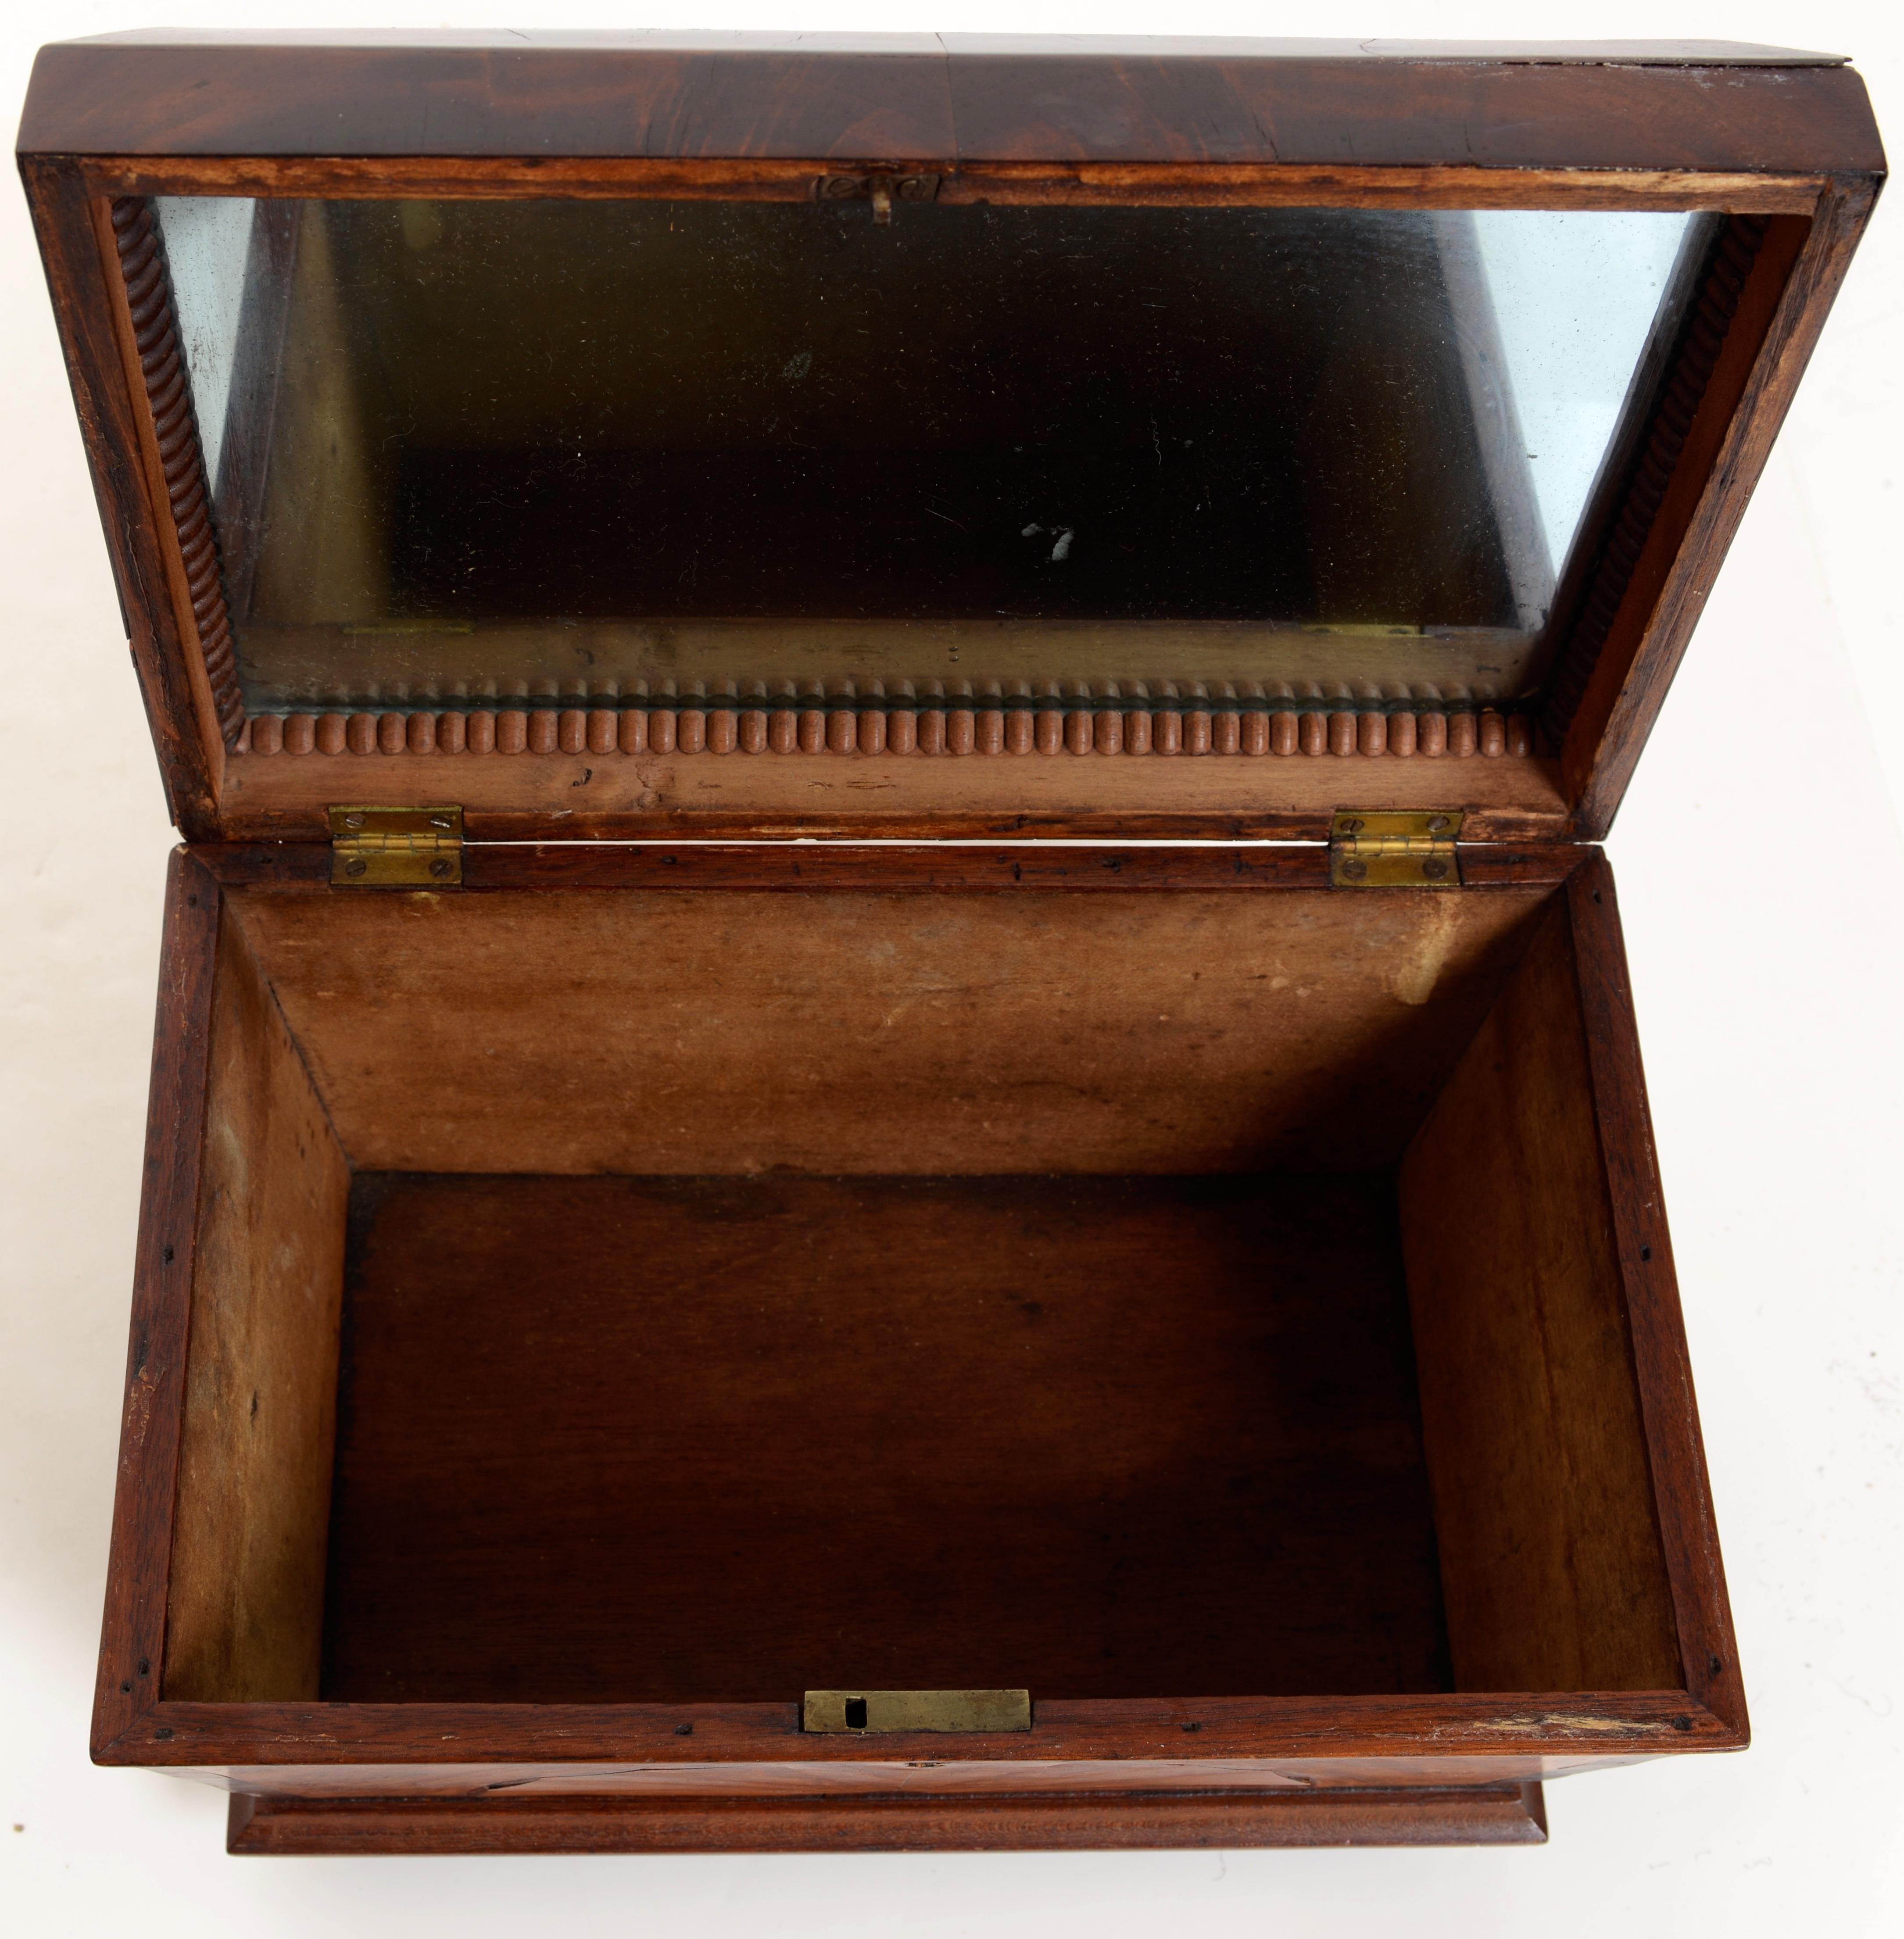 Brass Regency Fan Inlaid Jewelry Box With Fitted Interior and Mirrored Lid, c1810 For Sale